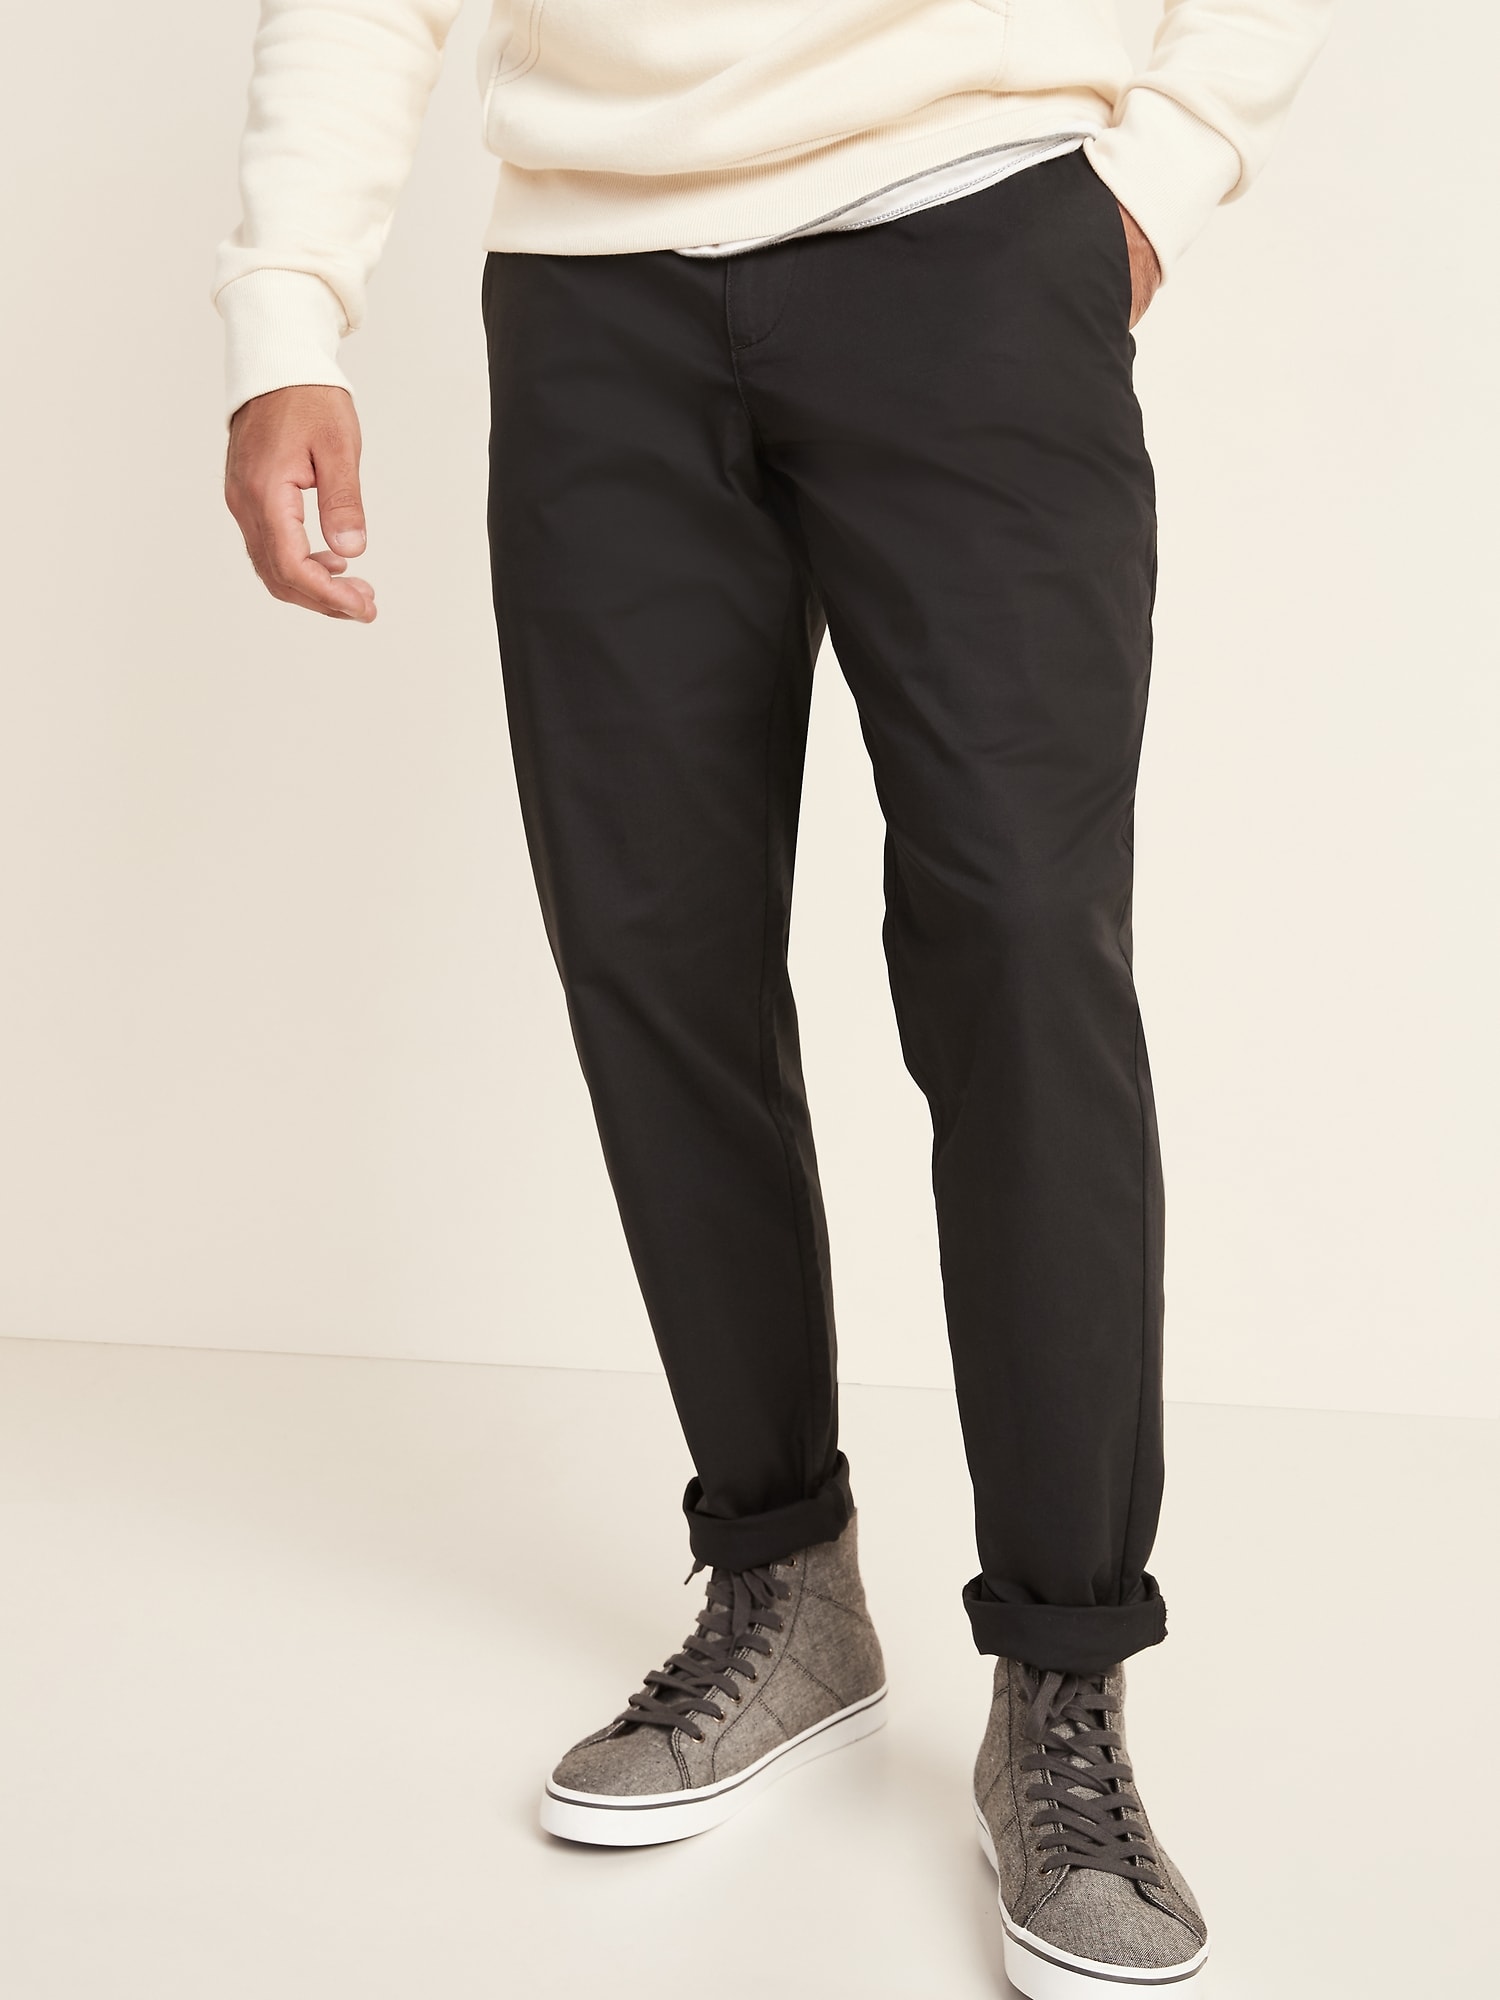 Athletic Built-In Flex Ultimate Chino Tech Pants